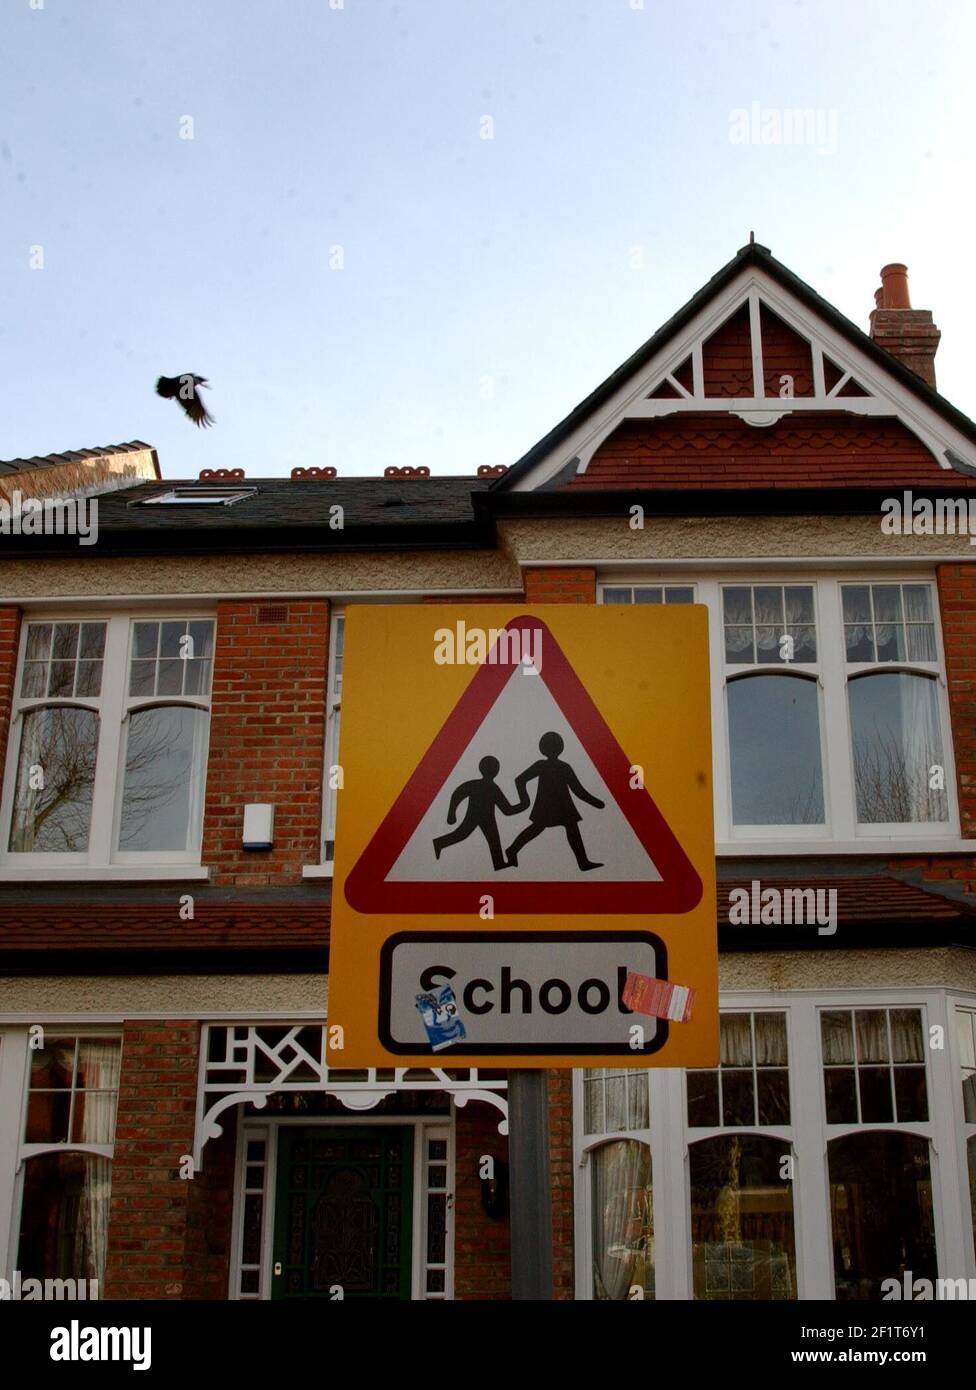 SIGN CLOSE TO TETHERDOWN SCHOOL IN MUSWELL HILL.4/2/04 PILSTON Stock Photo